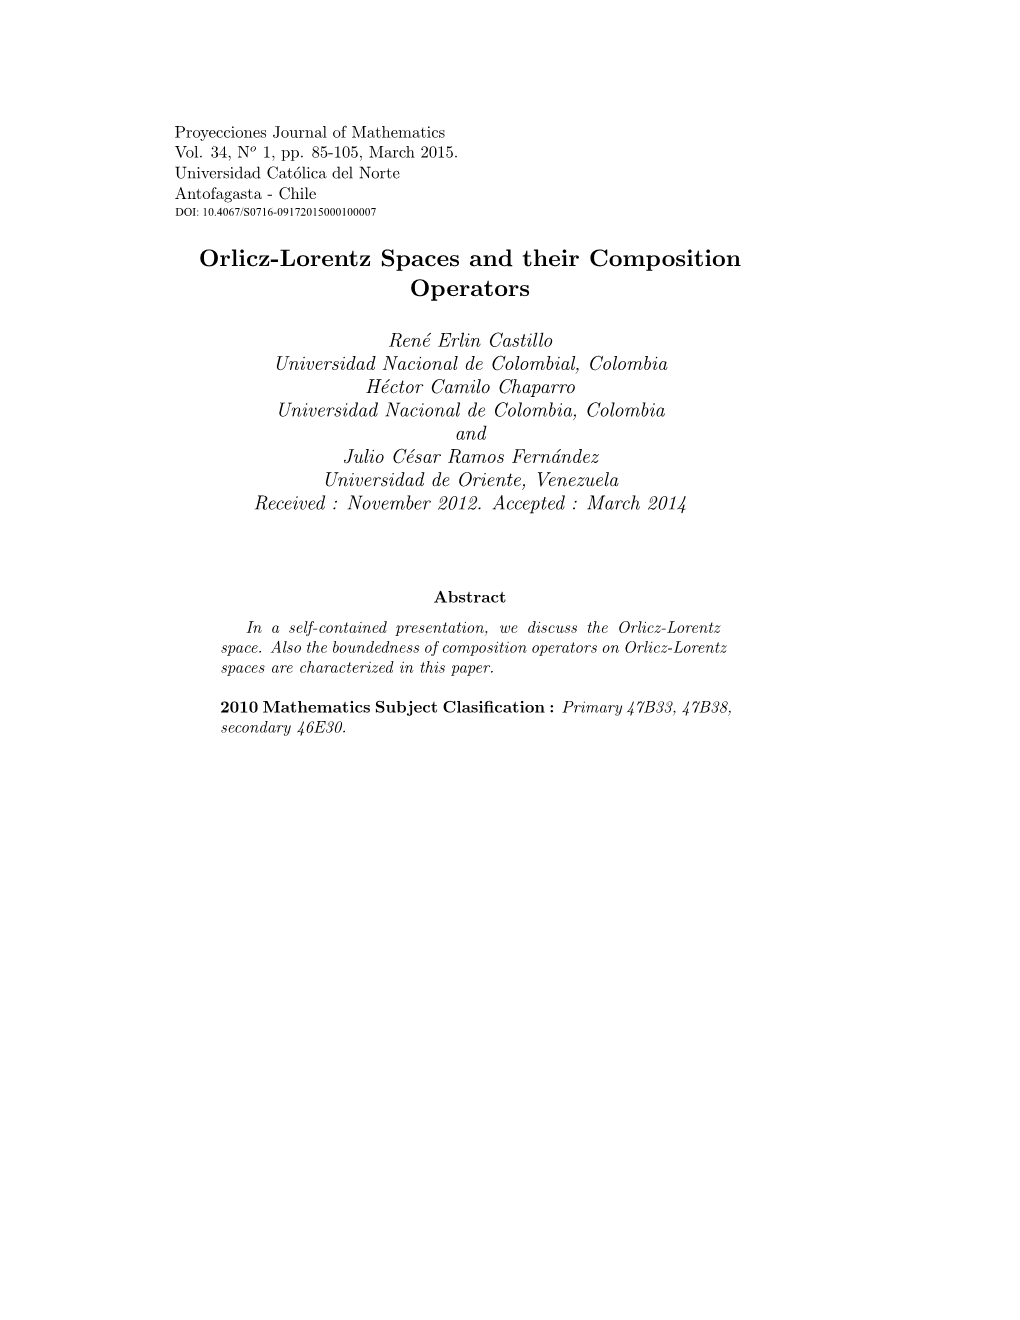 Orlicz-Lorentz Spaces and Their Composition Operators